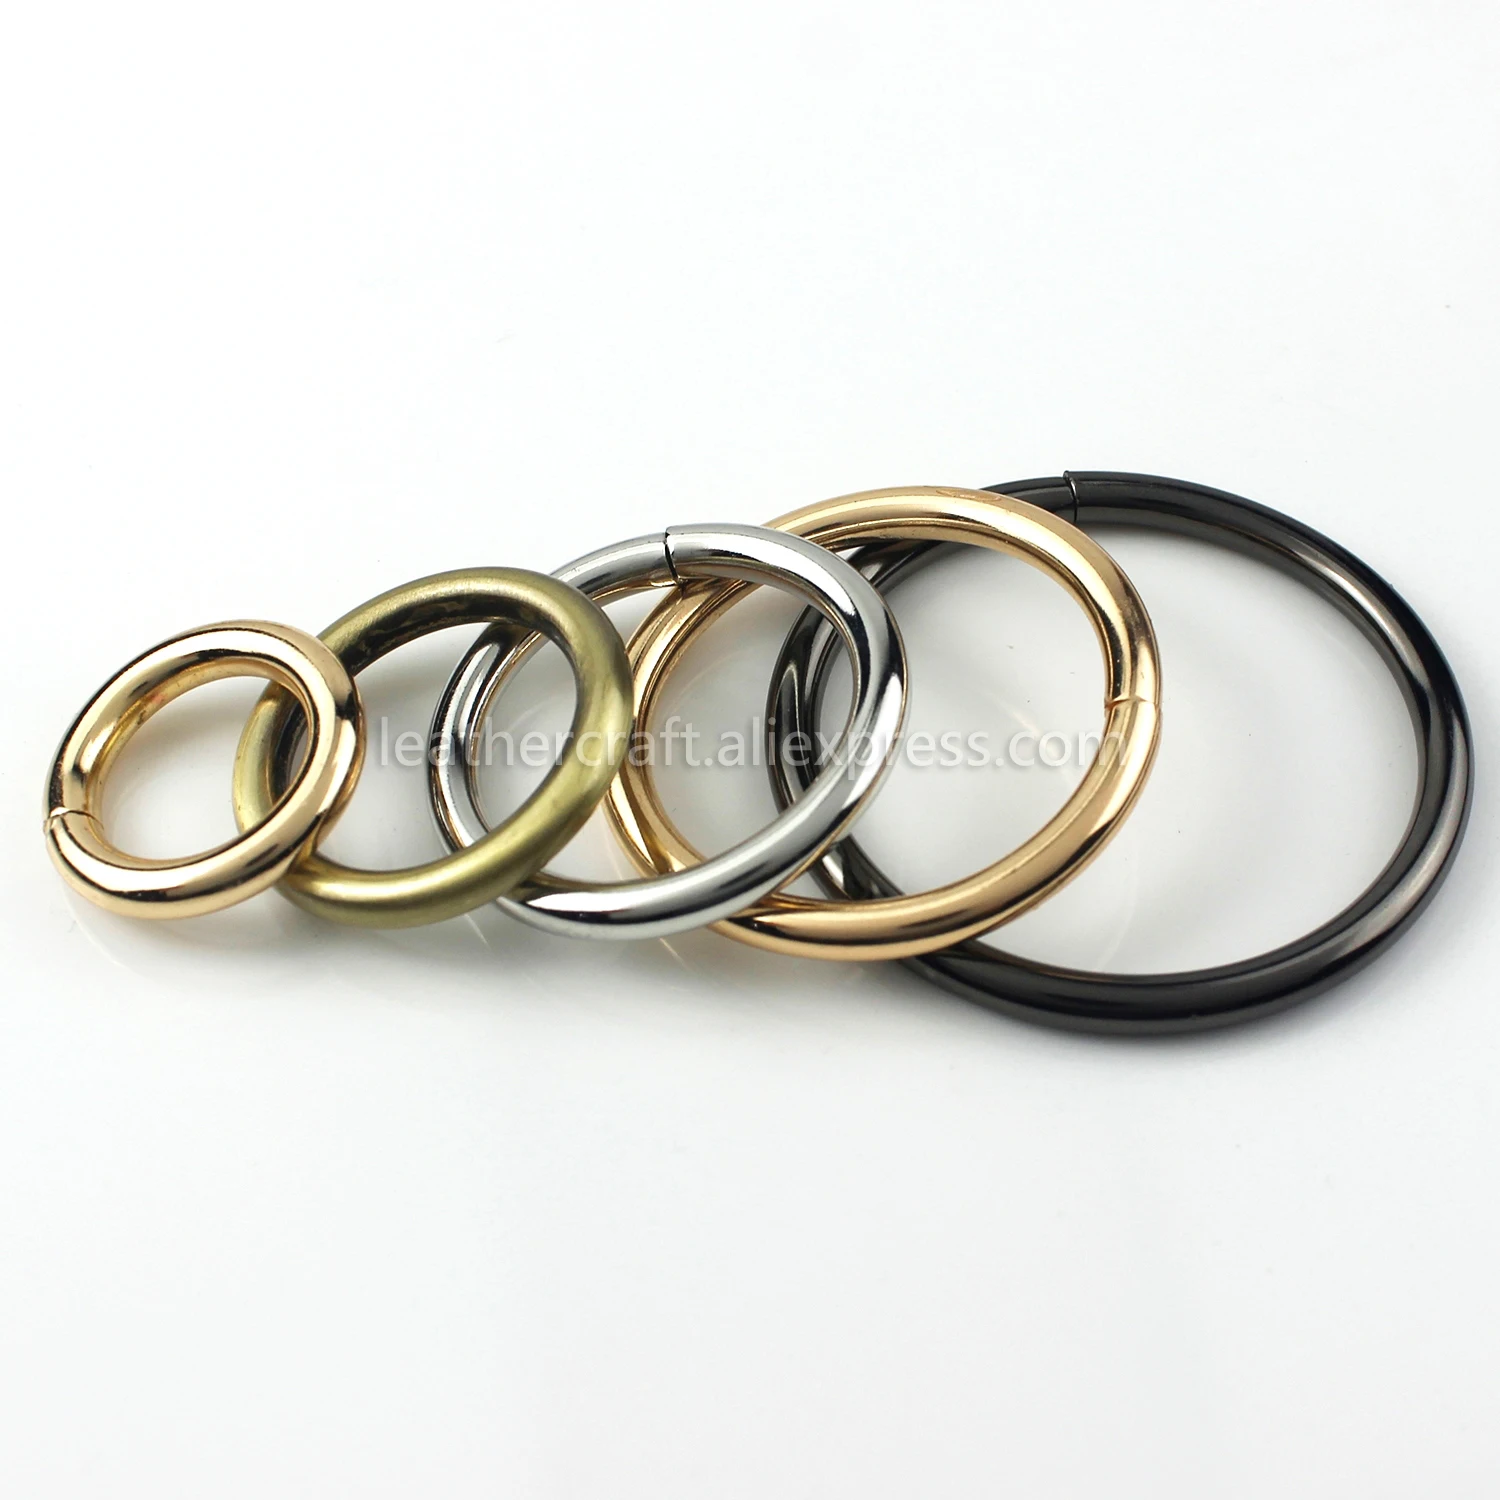 1 x Solid Metal Open-end O Ring Belt Buckle Leather Craft Garment Bag Strap Hardware accessories More Sizes 4.8mm Thickness